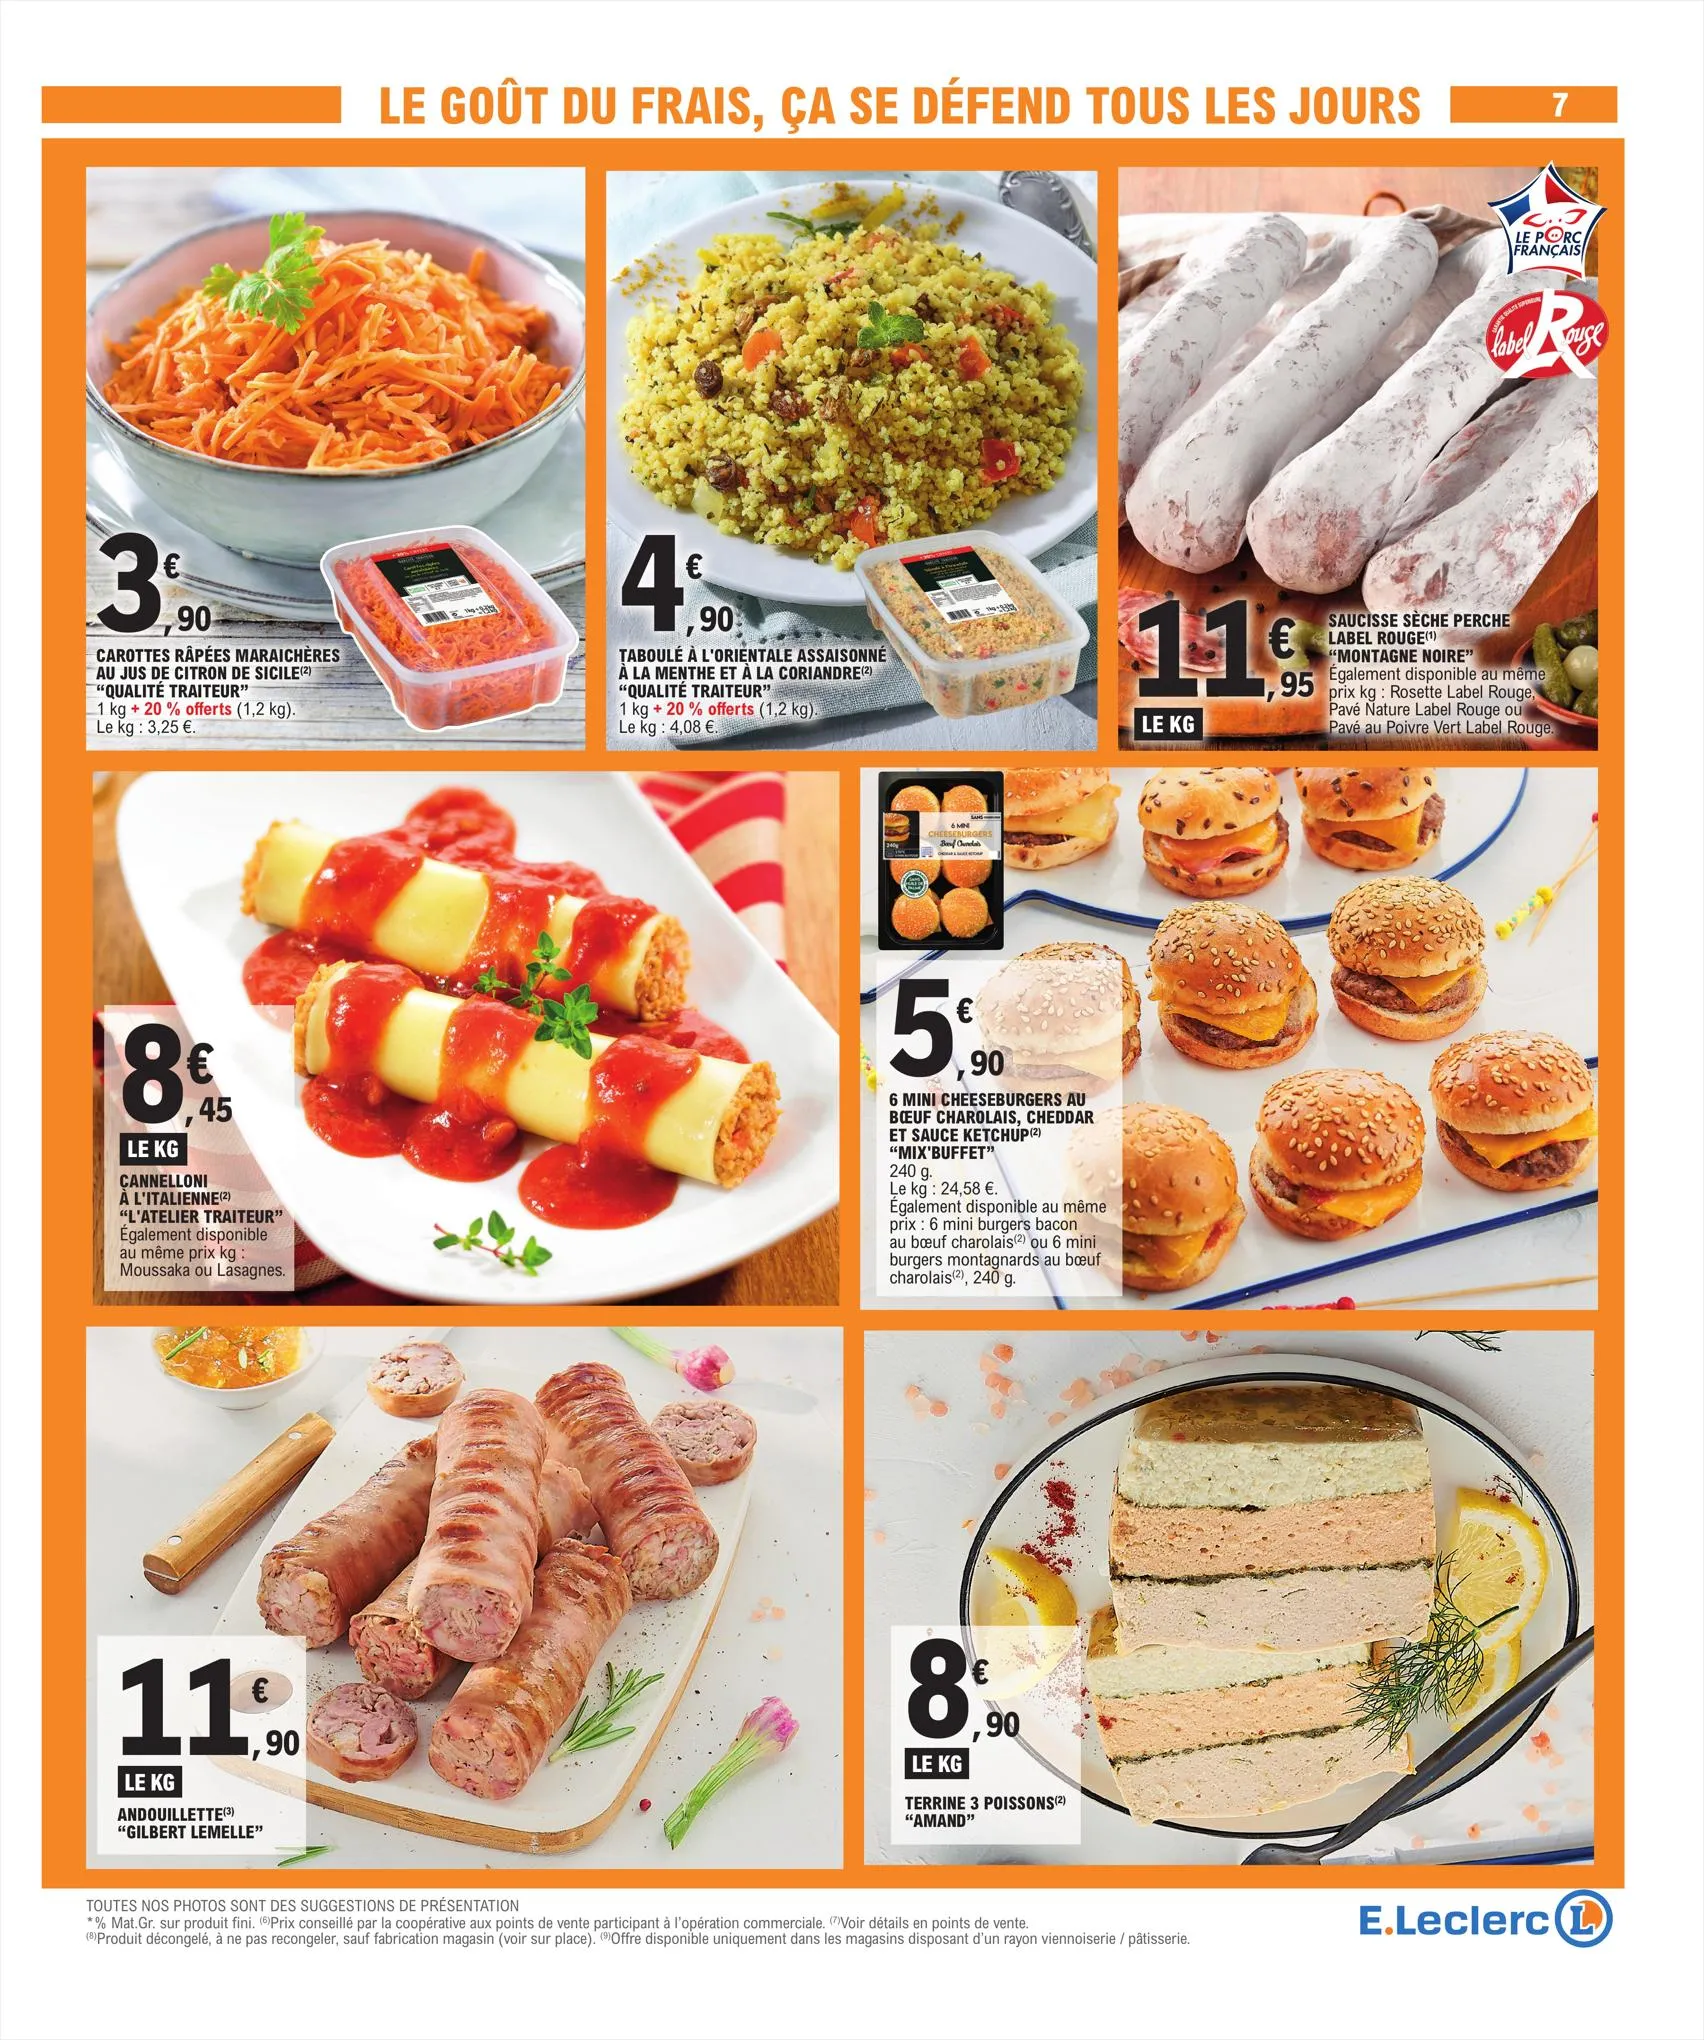 Catalogue Relance Alimentaire 11 - Mixte, page 00007